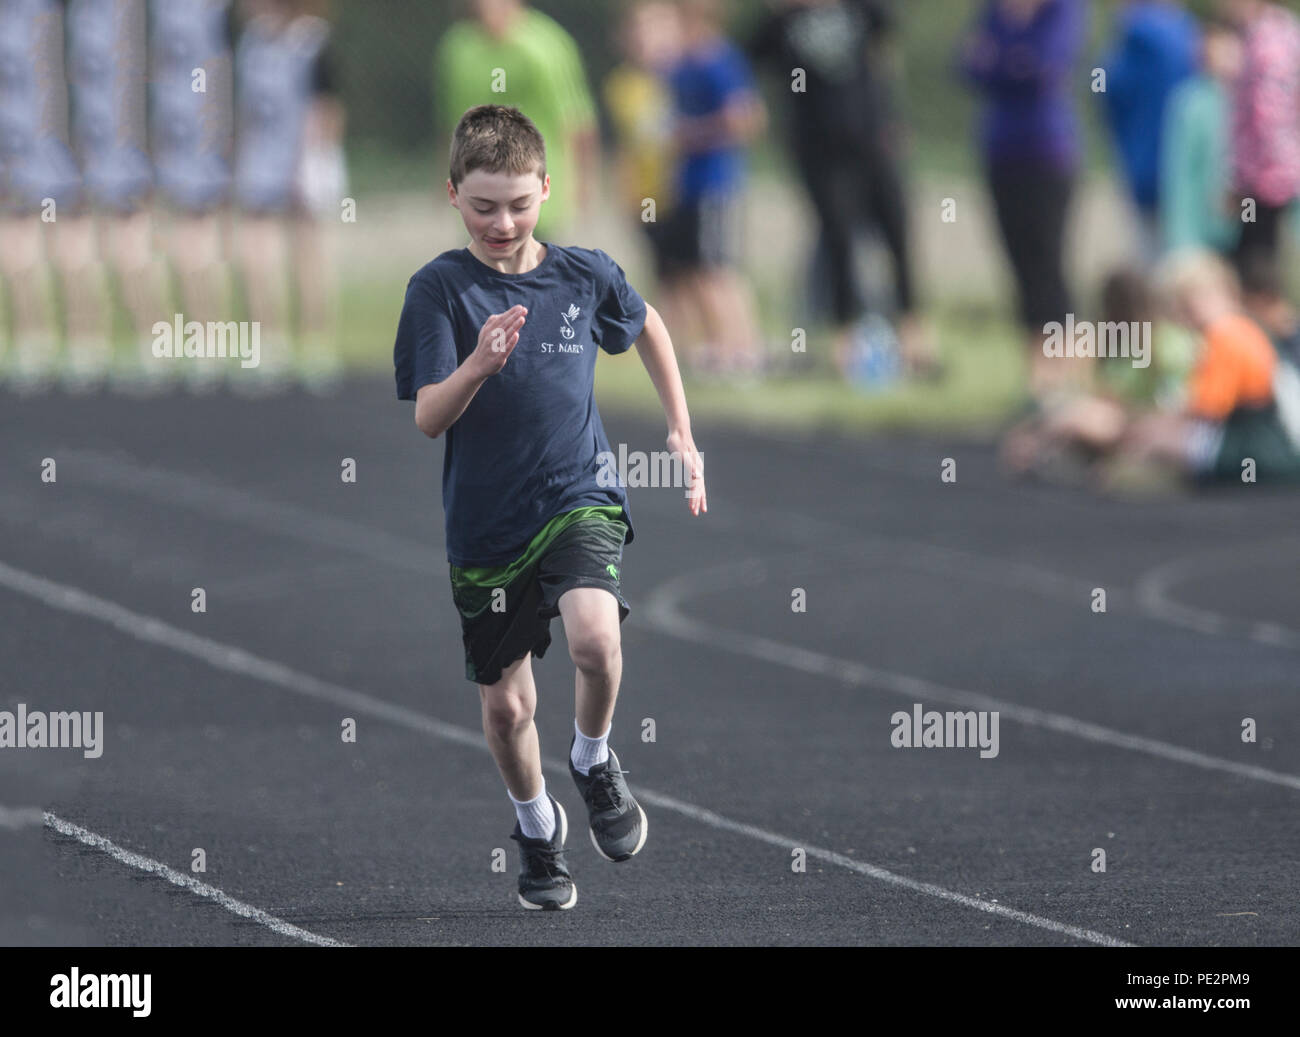 Young boy competing in track & field's, distance race, wearing shorts, t-shirt,. Model released Stock Photo